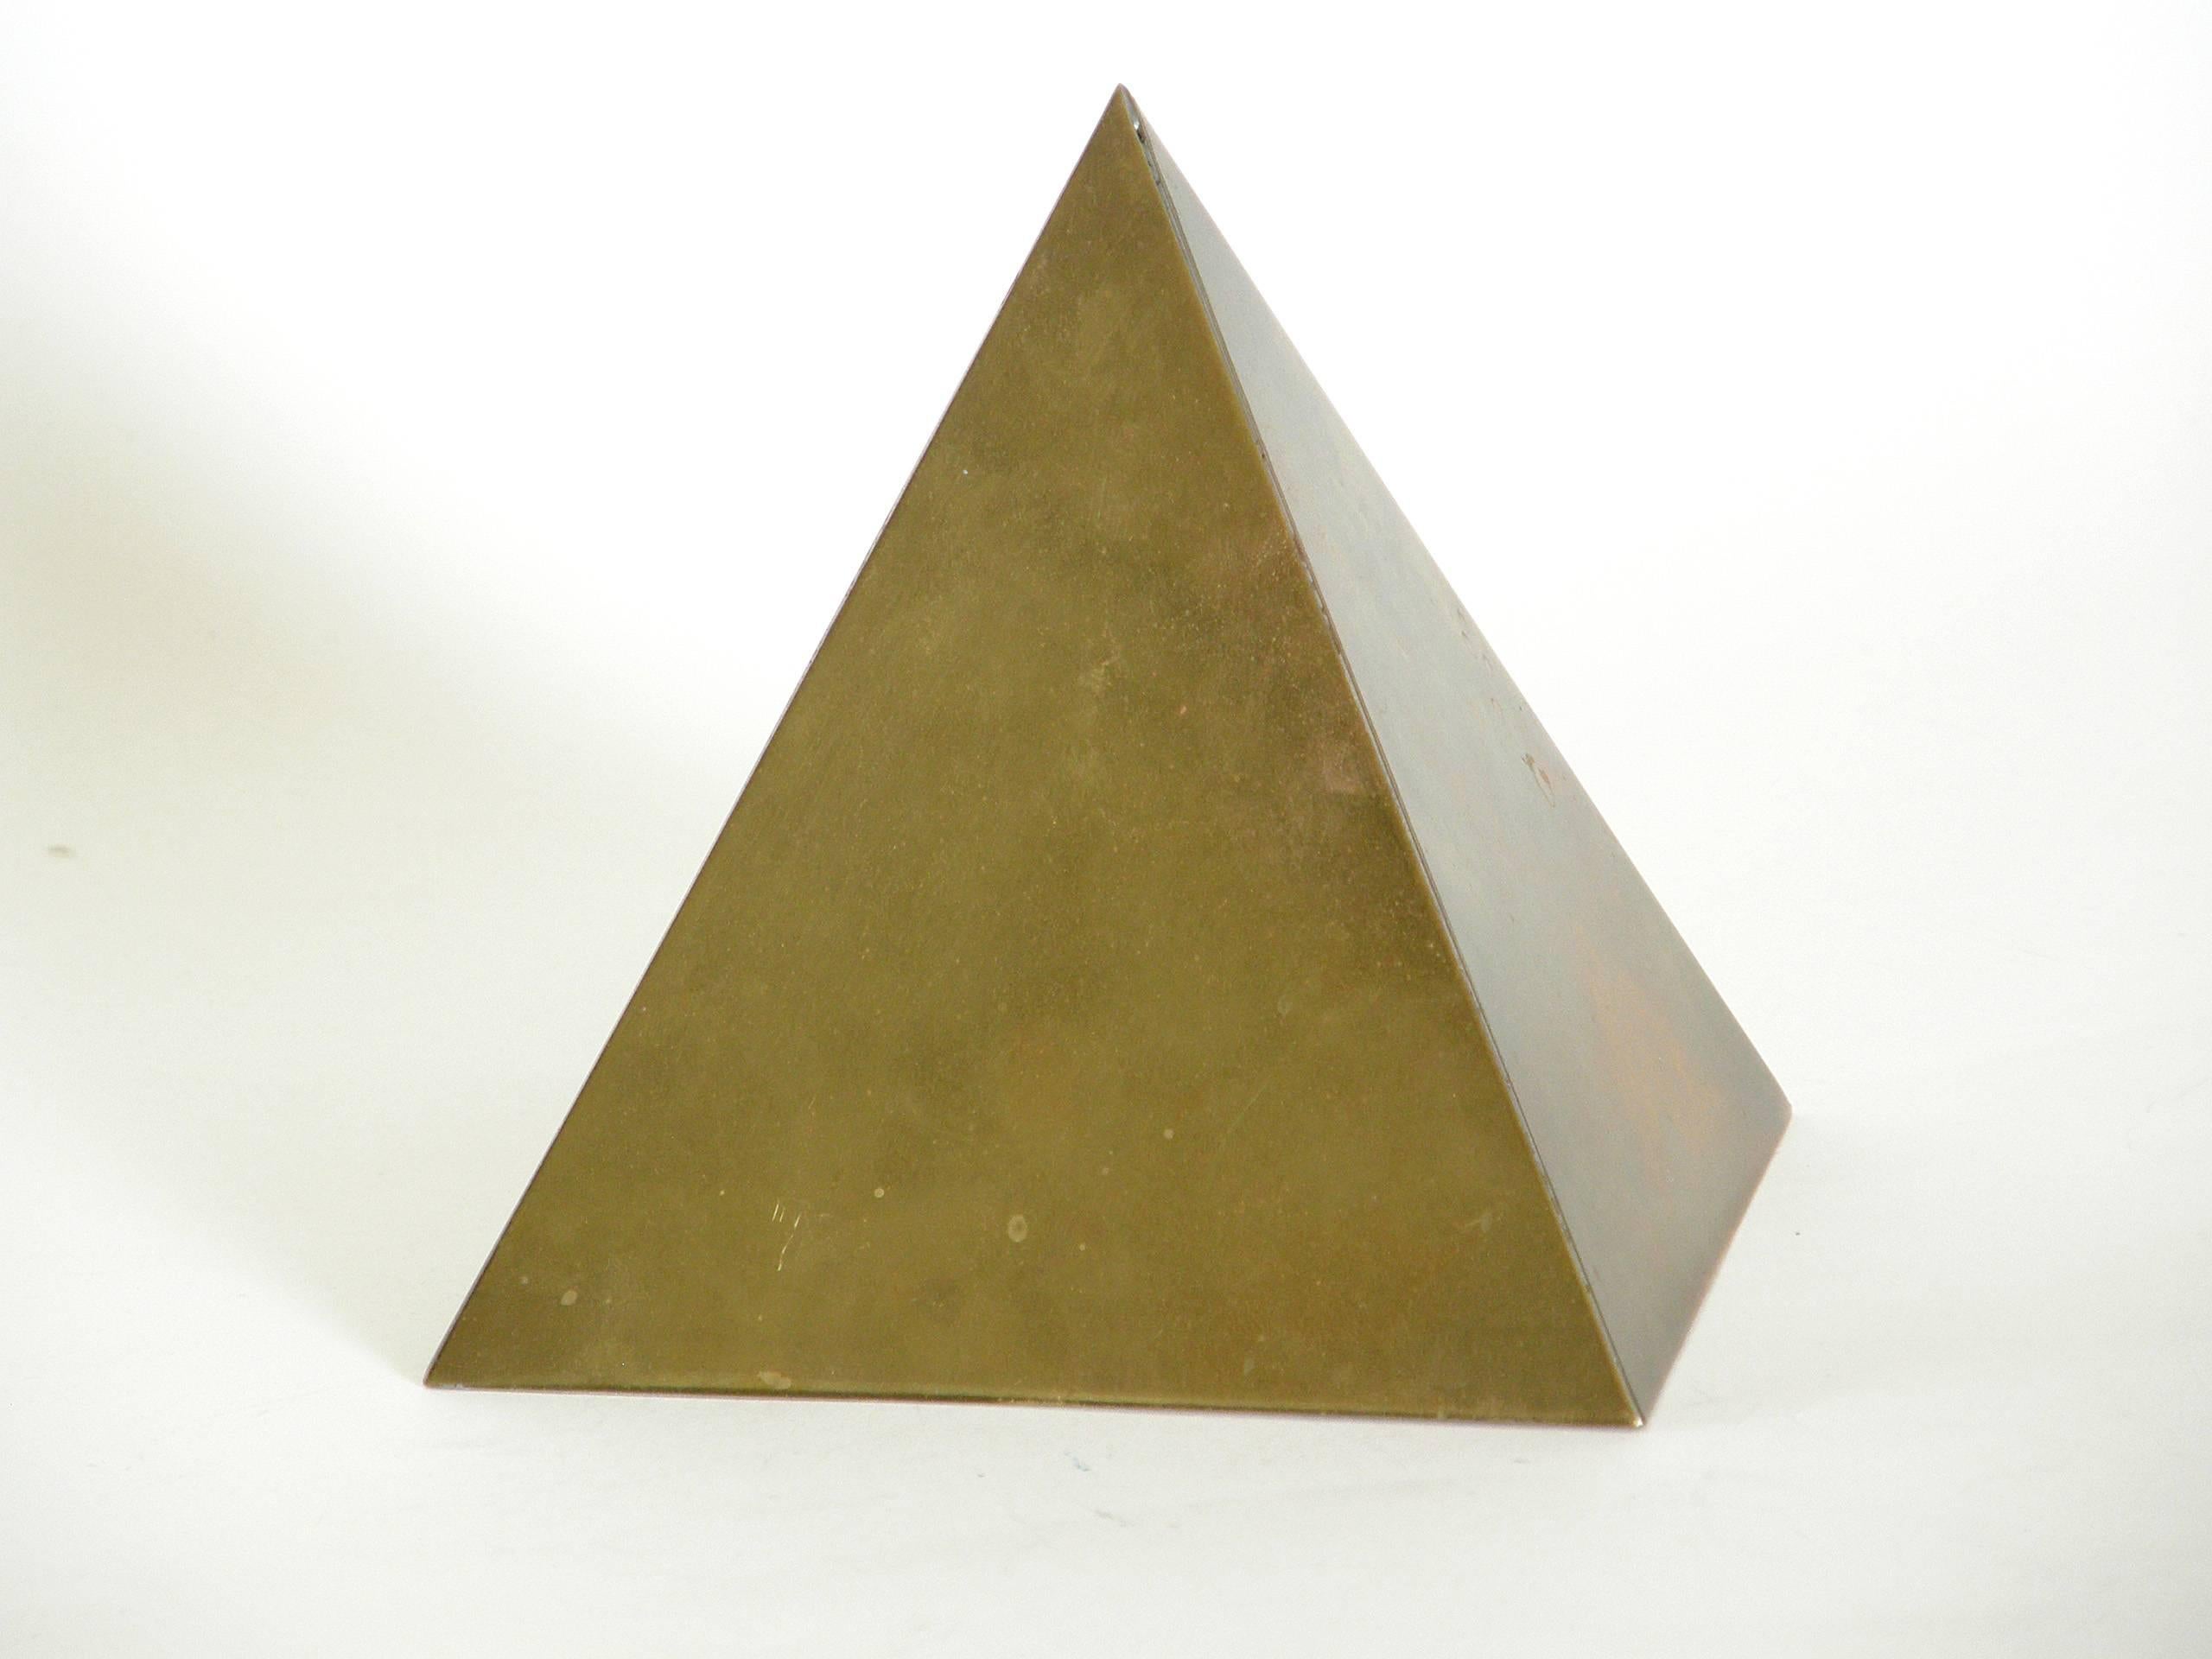 Brass pyramid made in Italy by Sarreid Ltd. This classically simple decorative object could also be used as a paperweight.

Please use contact dealer button if you have any questions.